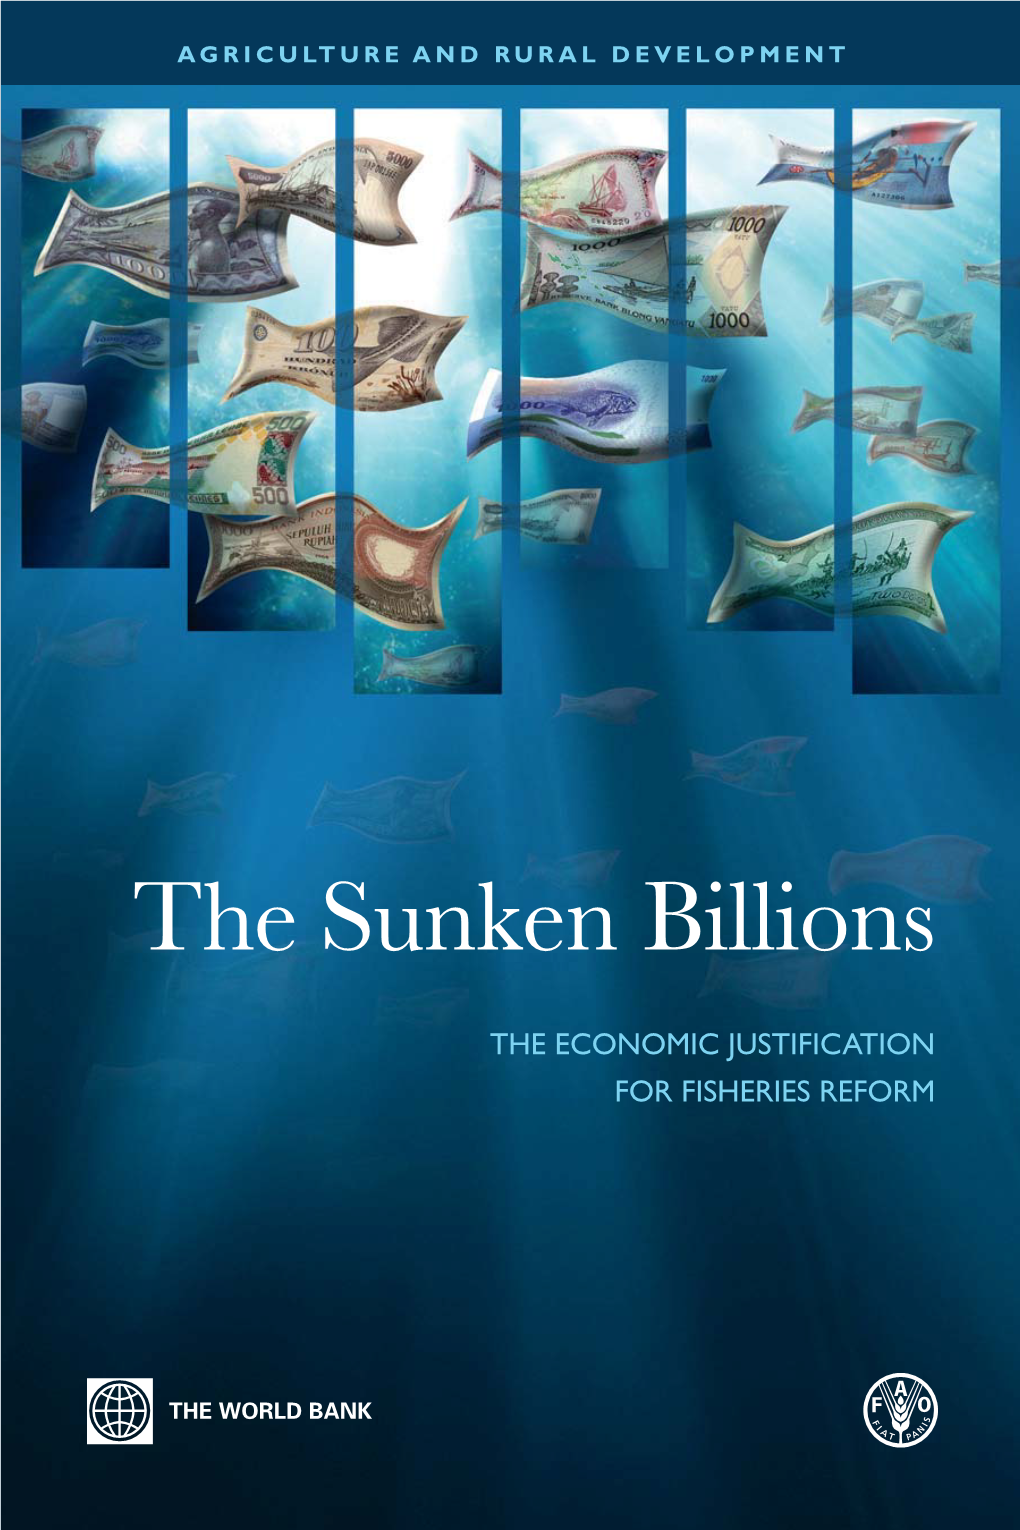 The Sunken Billions: the Economic Justification for Fisheries Reform